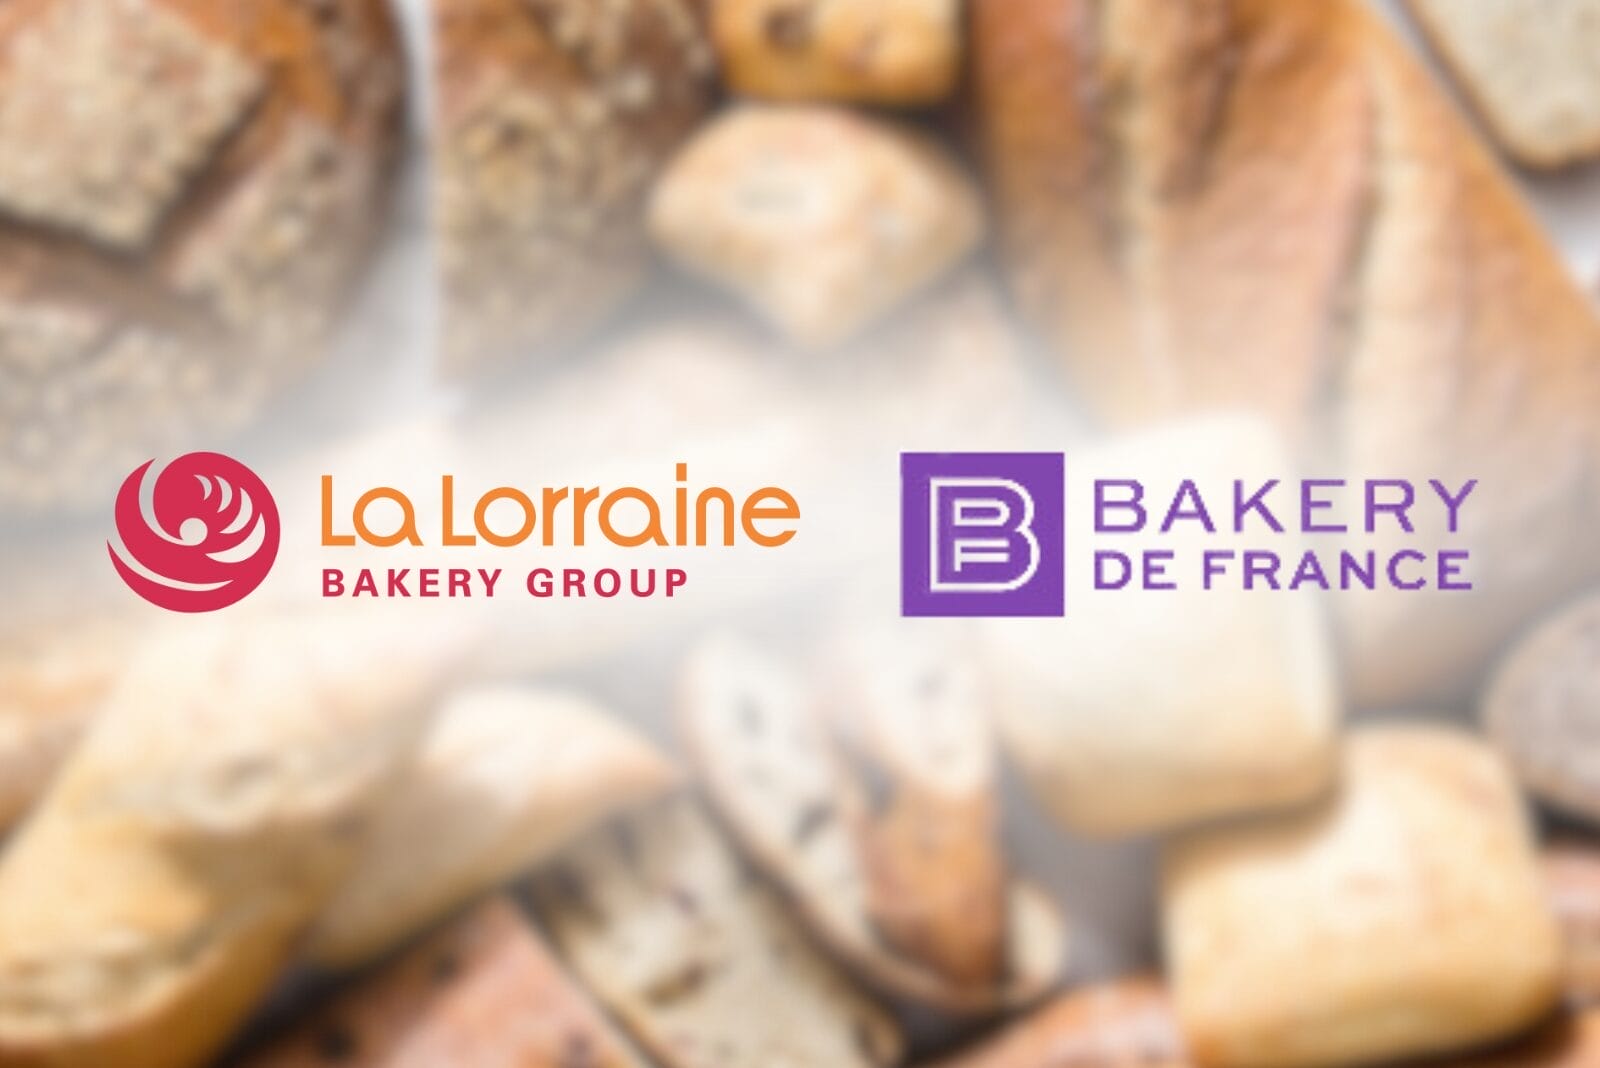 La Lorraine Bakery Group and Bakery de France logos with a bread background